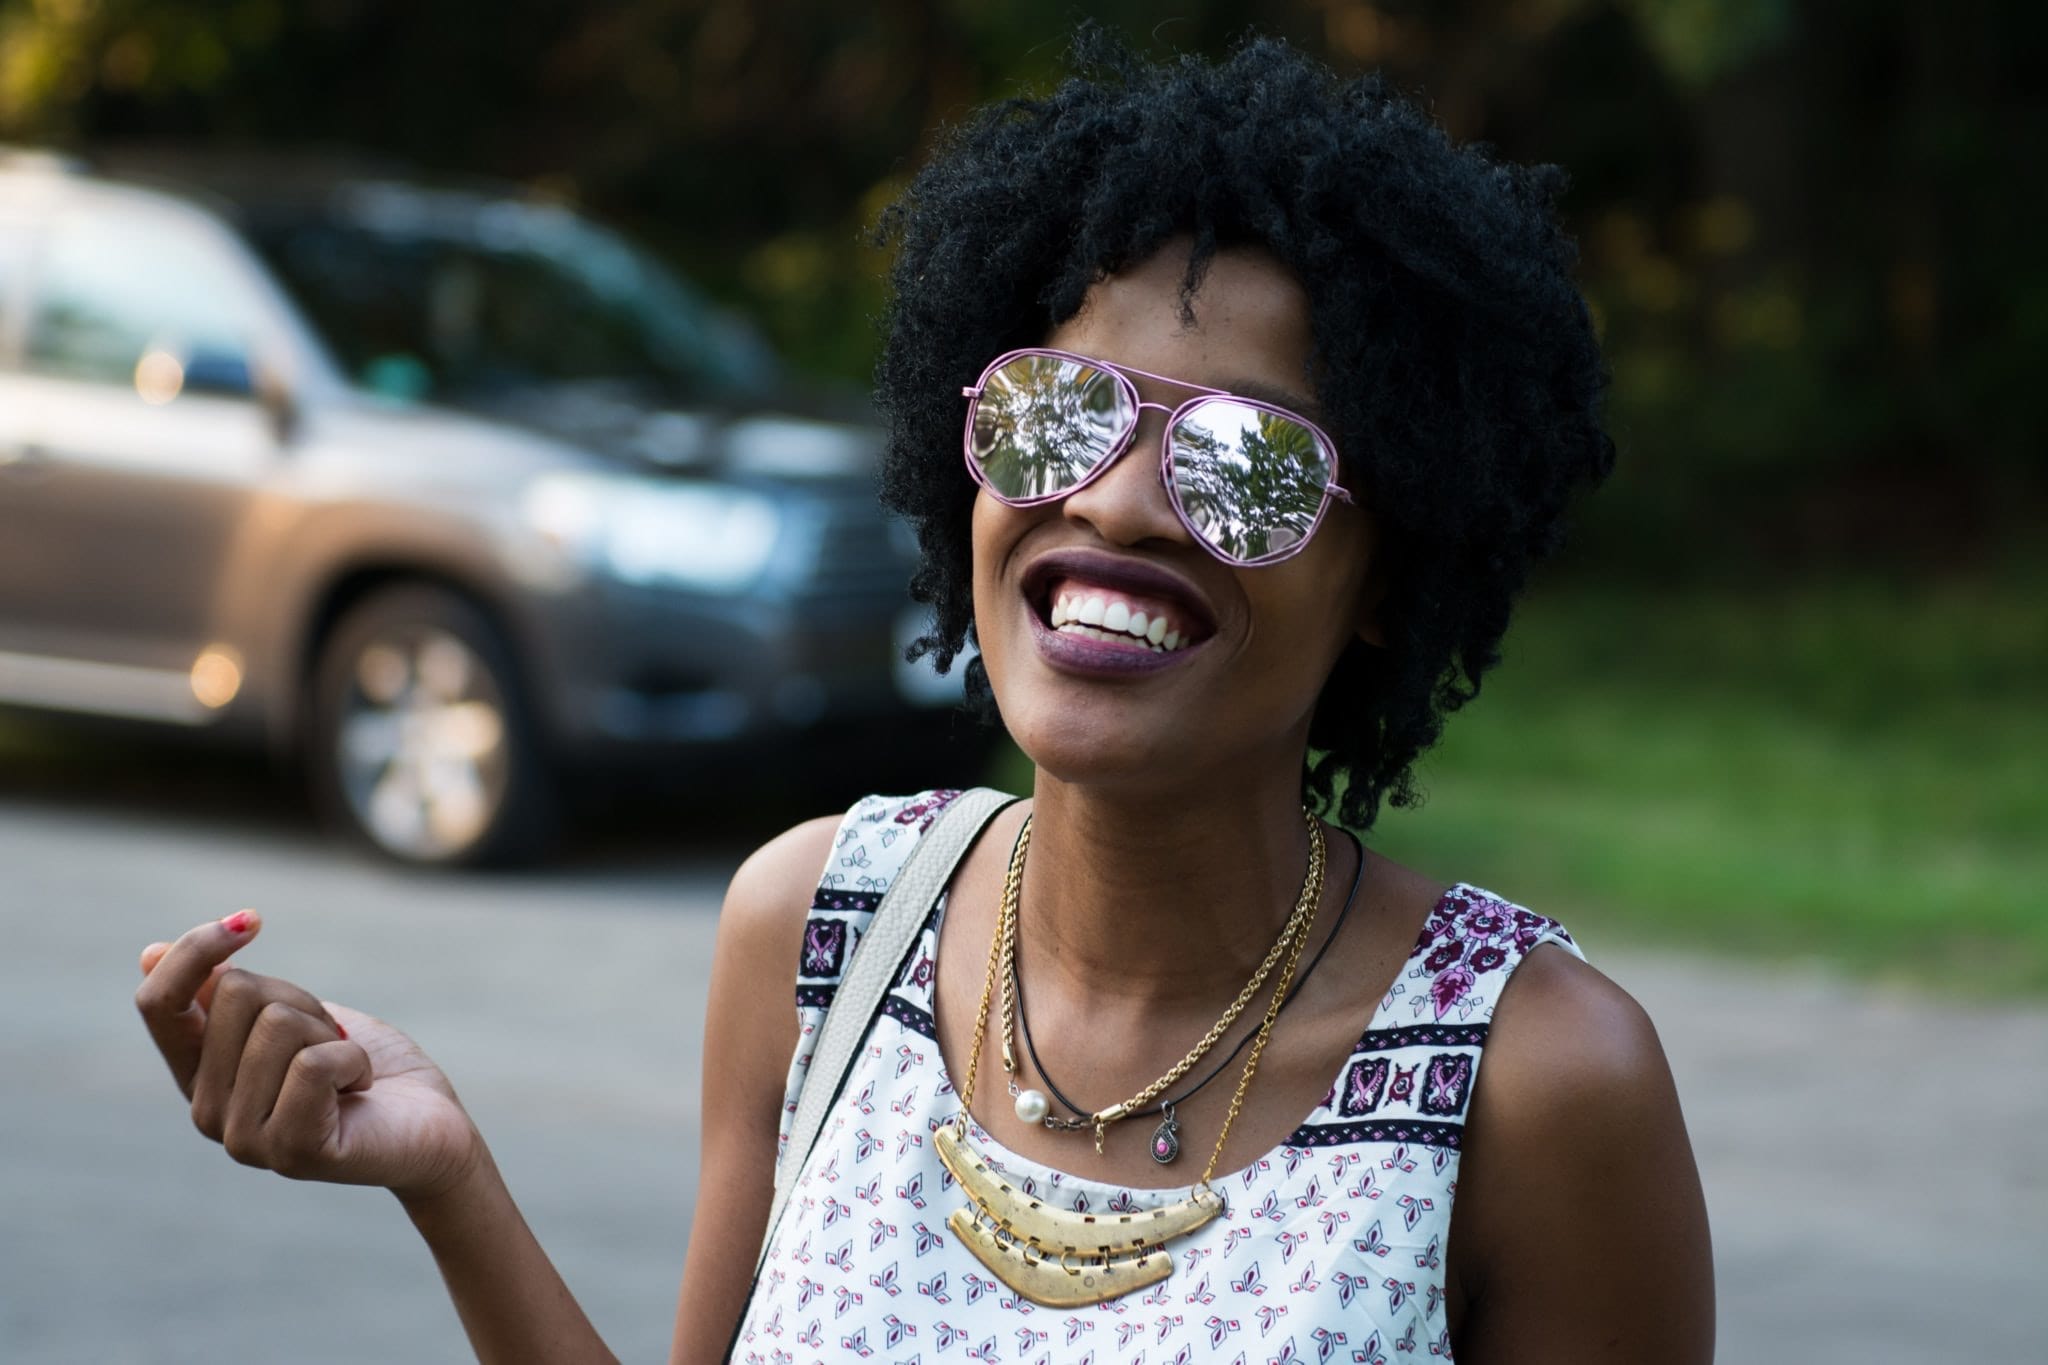 woman smiling with sunglasses on